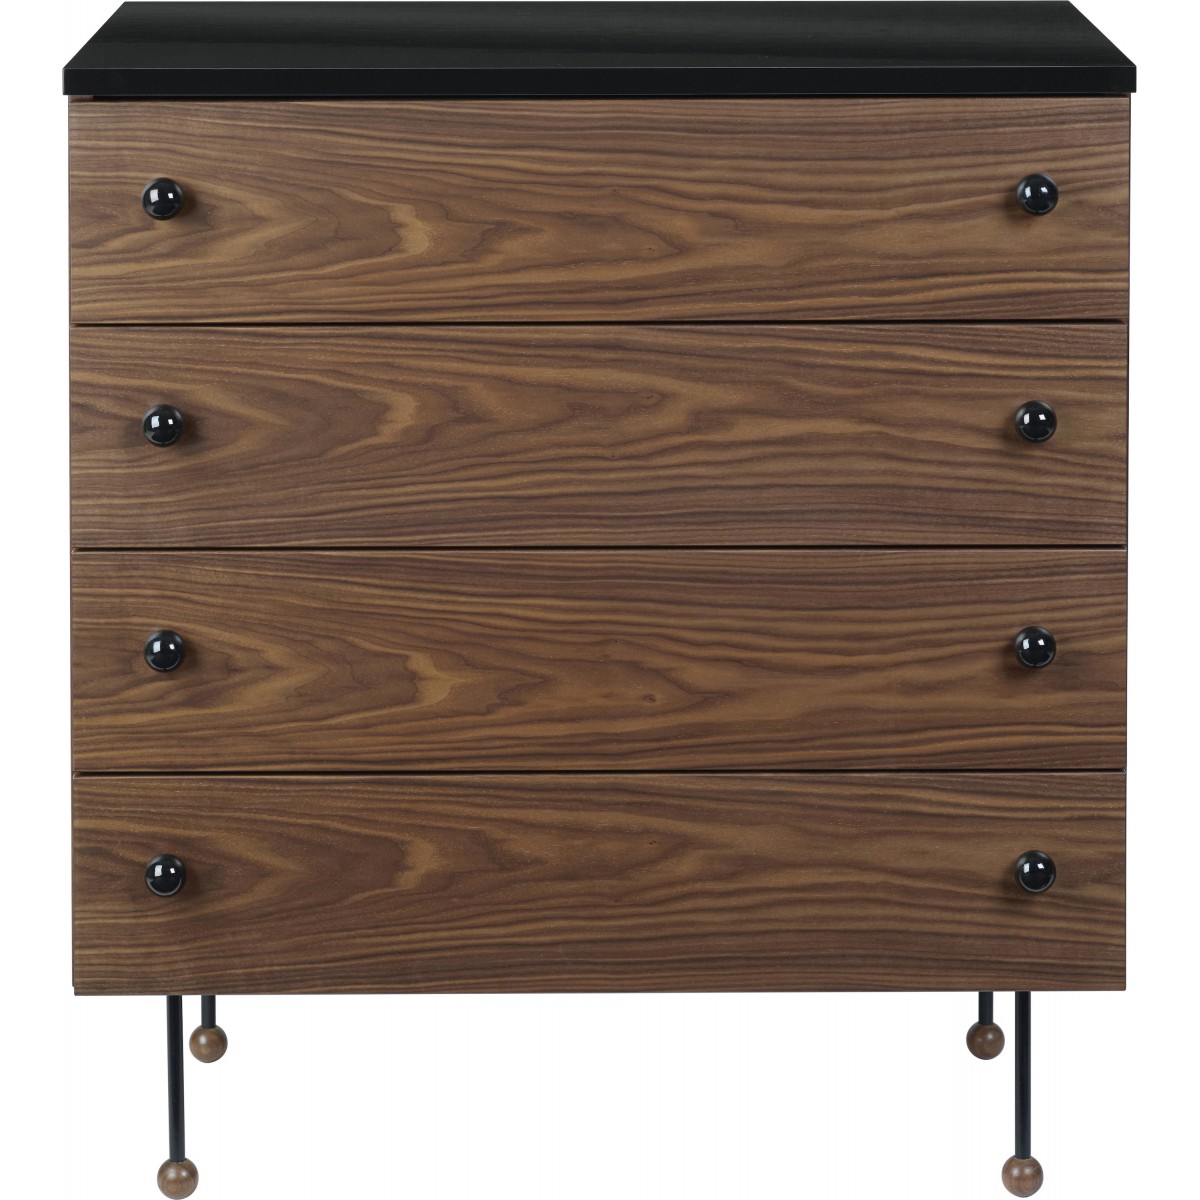 4 drawers - "62-collection" dresser